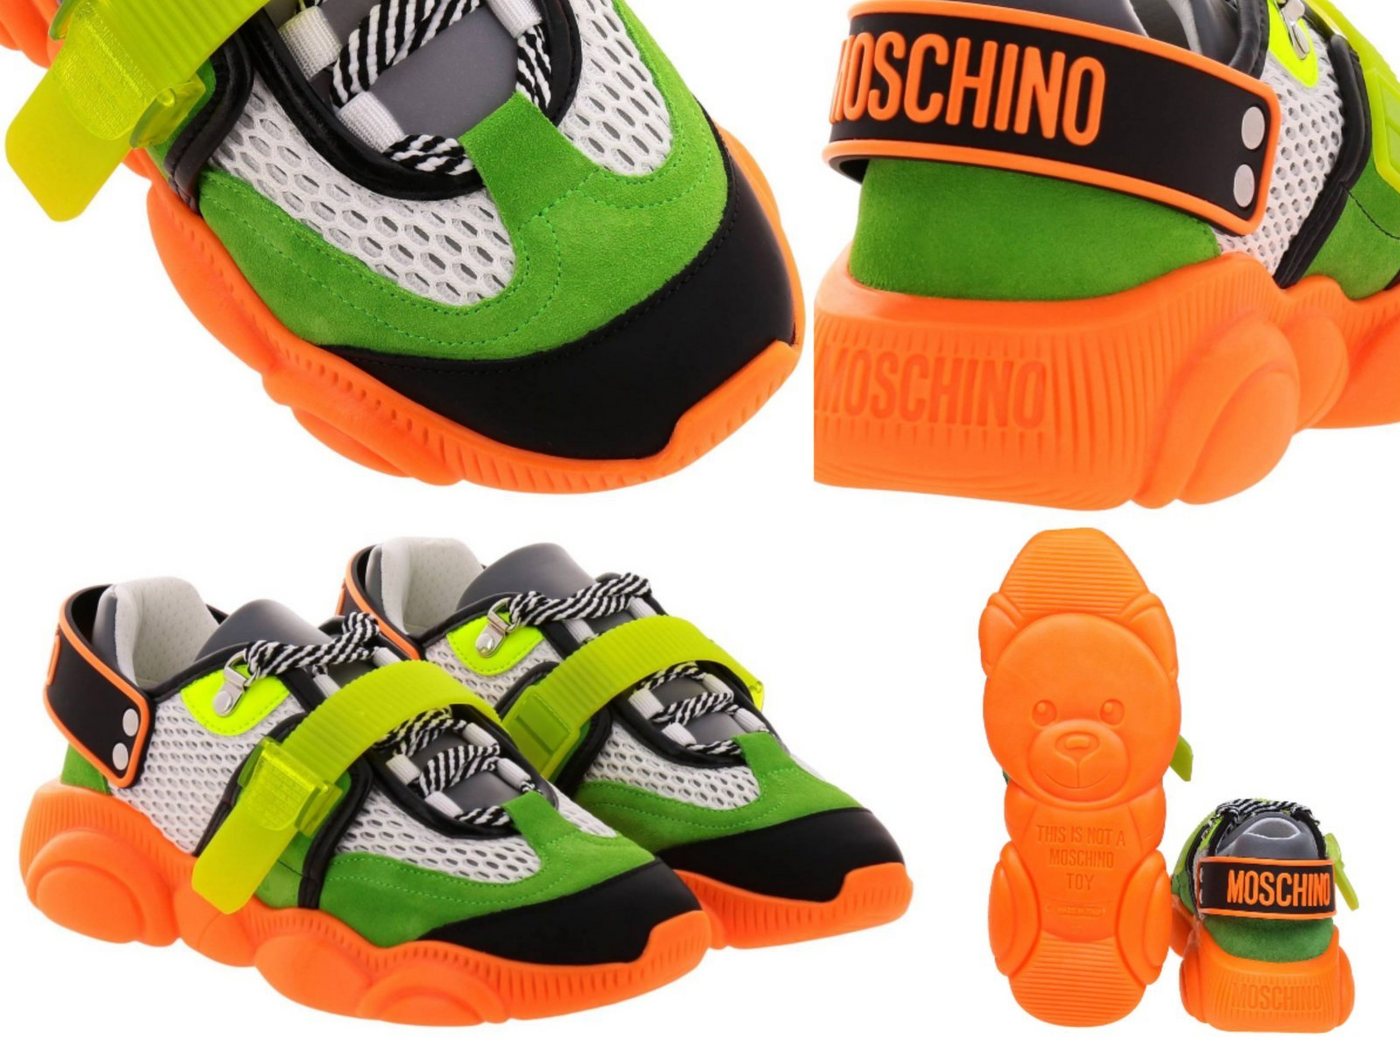 Moschino MOSCHINO COUTURE Special Teddy Shoes Fluo Sneakers Trainers Schuhe Tur Sneaker von Moschino